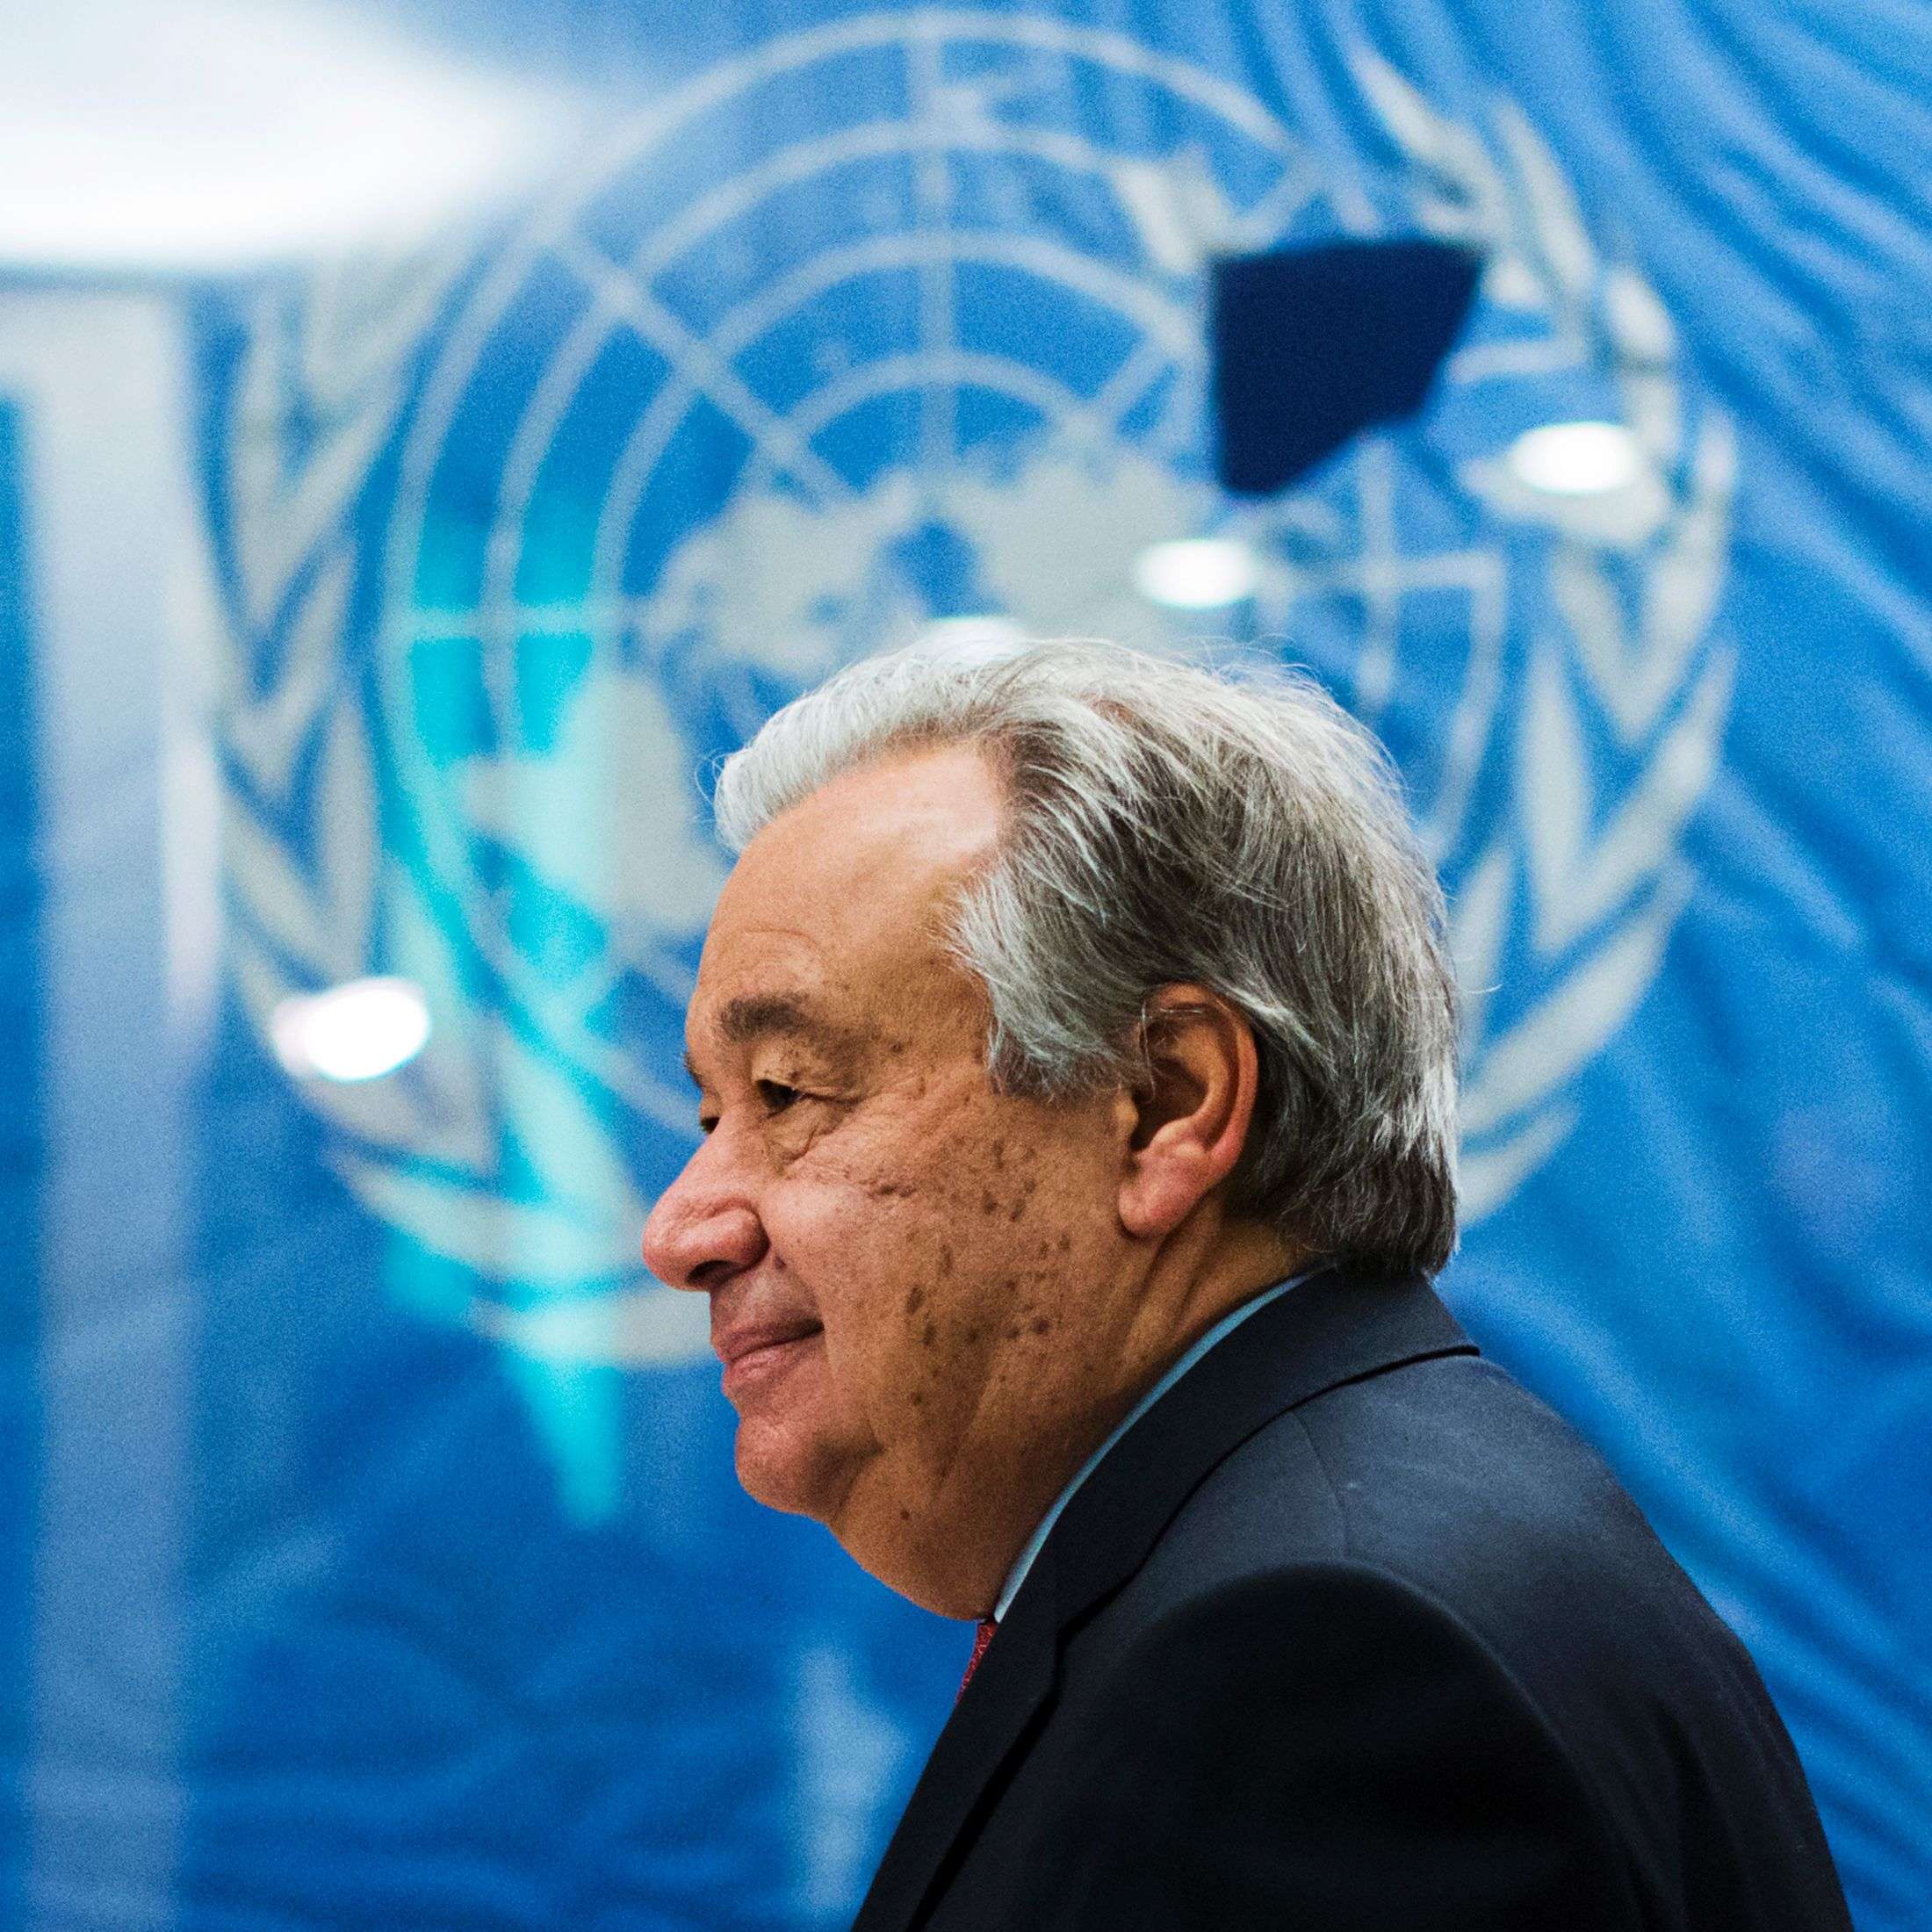 United Nations Secretary-General Antonio Guterres, took part in a ceremony to honour UN employees killed in the line of duty at UN headquarters on January 3, 2017 in New York. Photo: AFP